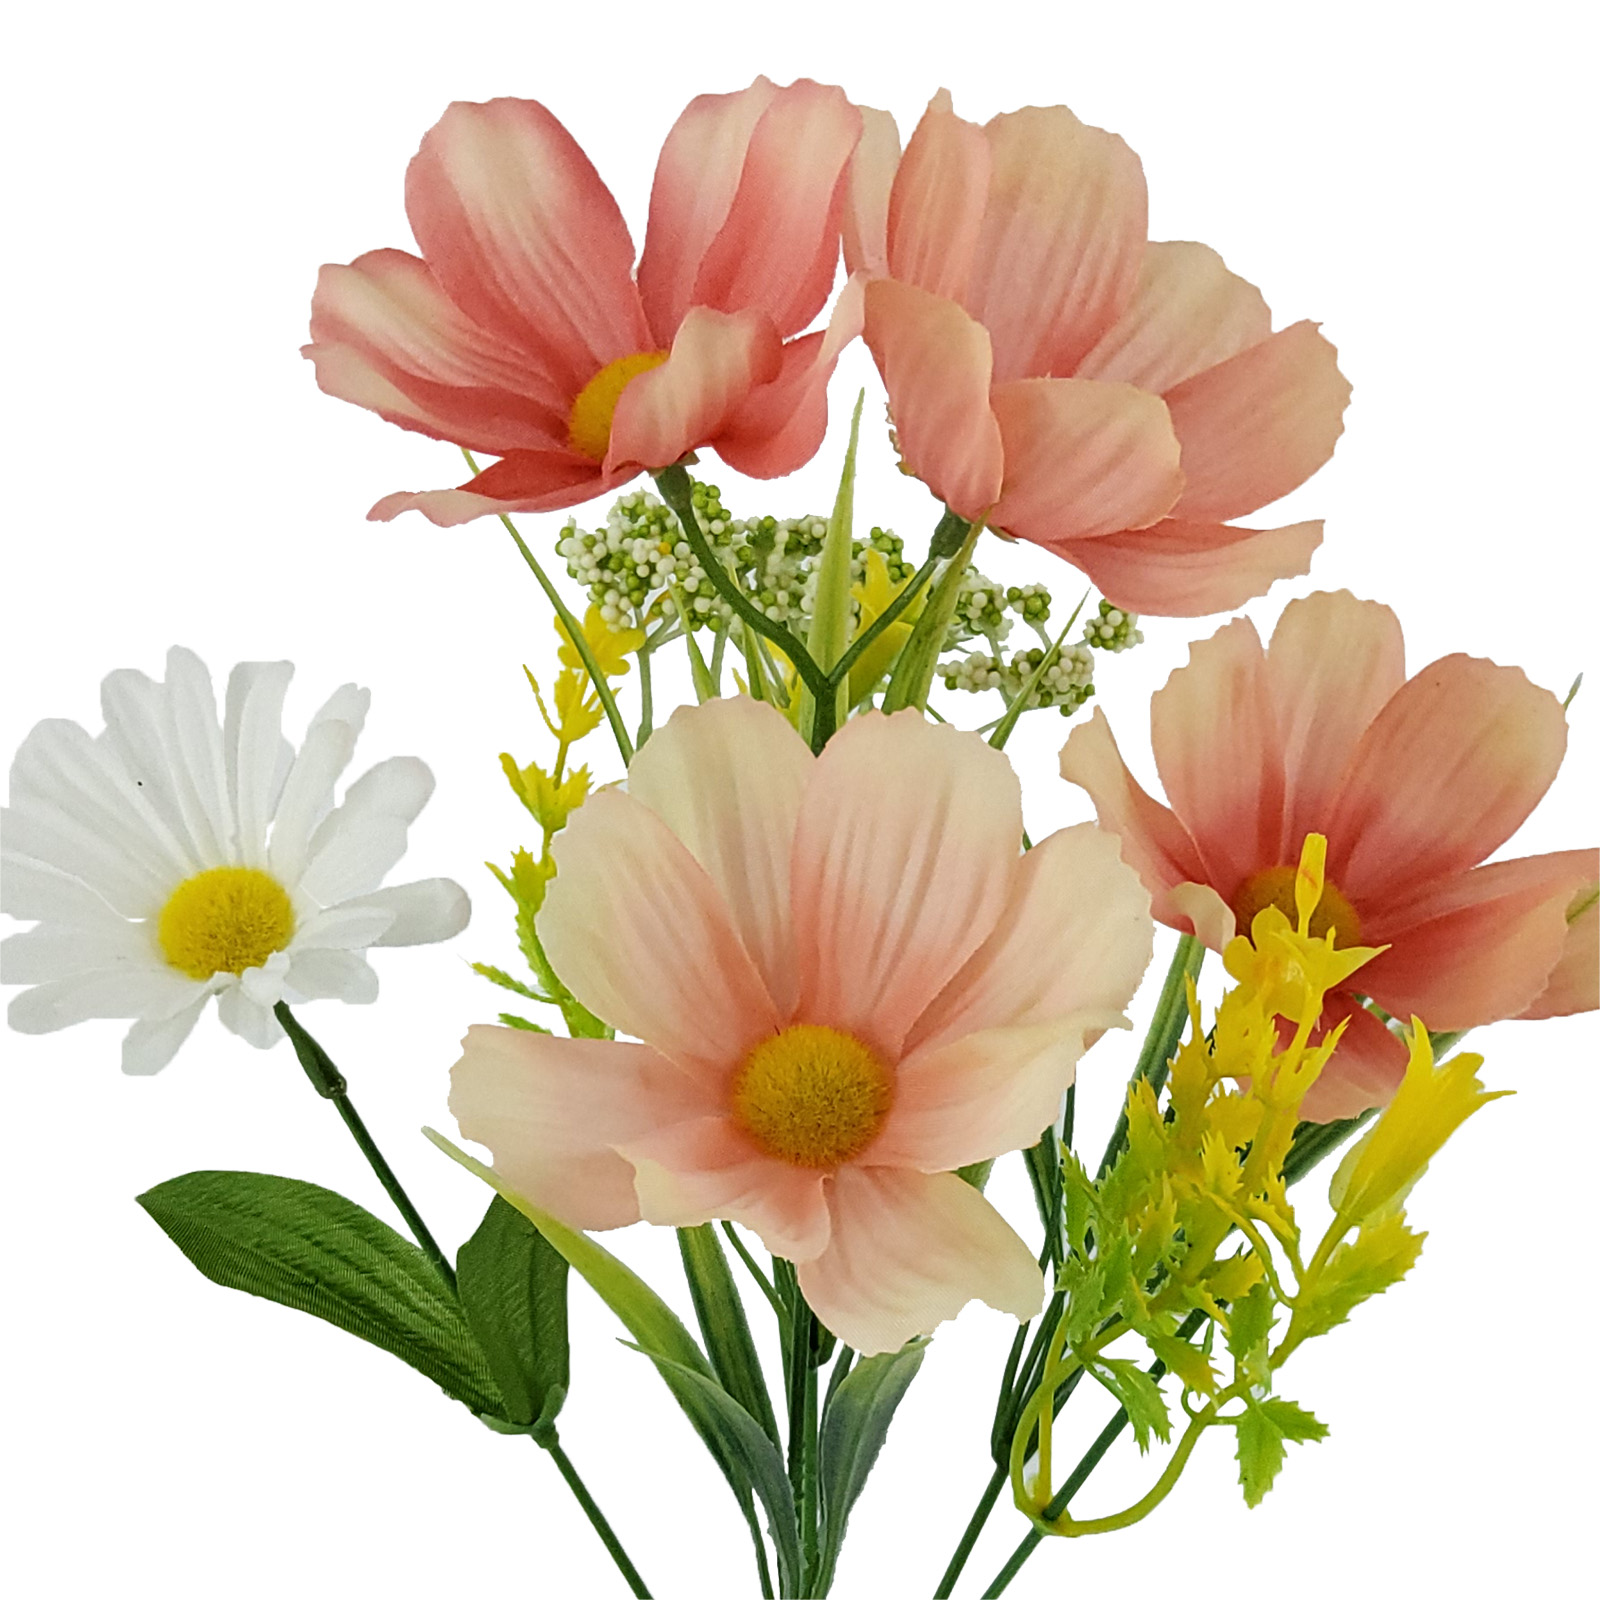 Mainstays 13.5" Indoor Artificial Cosmos Floral Mix Pick, Pink Color. - image 2 of 5